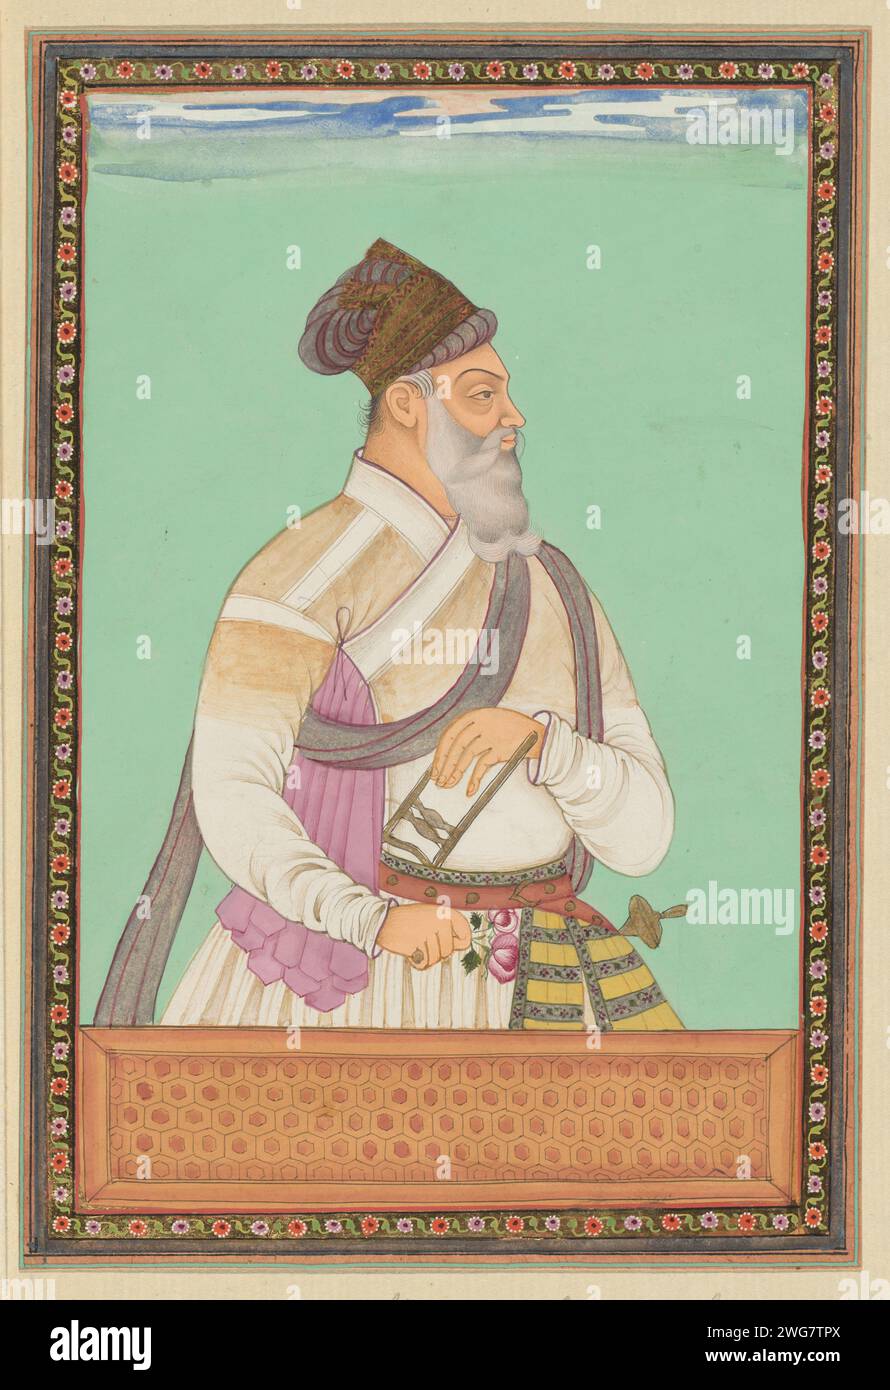 Portrait of Mirza Ilich Khan, who has been Aurangzeb's sights, c. 1686 drawing. Indian miniature Mirza Ilich Khan is depicted up to his hips, used to the right, in his right hand a flower, his left rest on a Kattan inserted into his belt. Page 15 in the `Witsen-Album ', with 49 Indian miniatures of princes. Above the portrait a piece of paper with the name in Persian. Under the portrait a piece of paper with the name in the Portuguese. Golkonda paper. deck paint. gold leaf. gouache (paint) brush ruler, sovereign. historical person (...) - historical person (...) portrayed alone Stock Photo